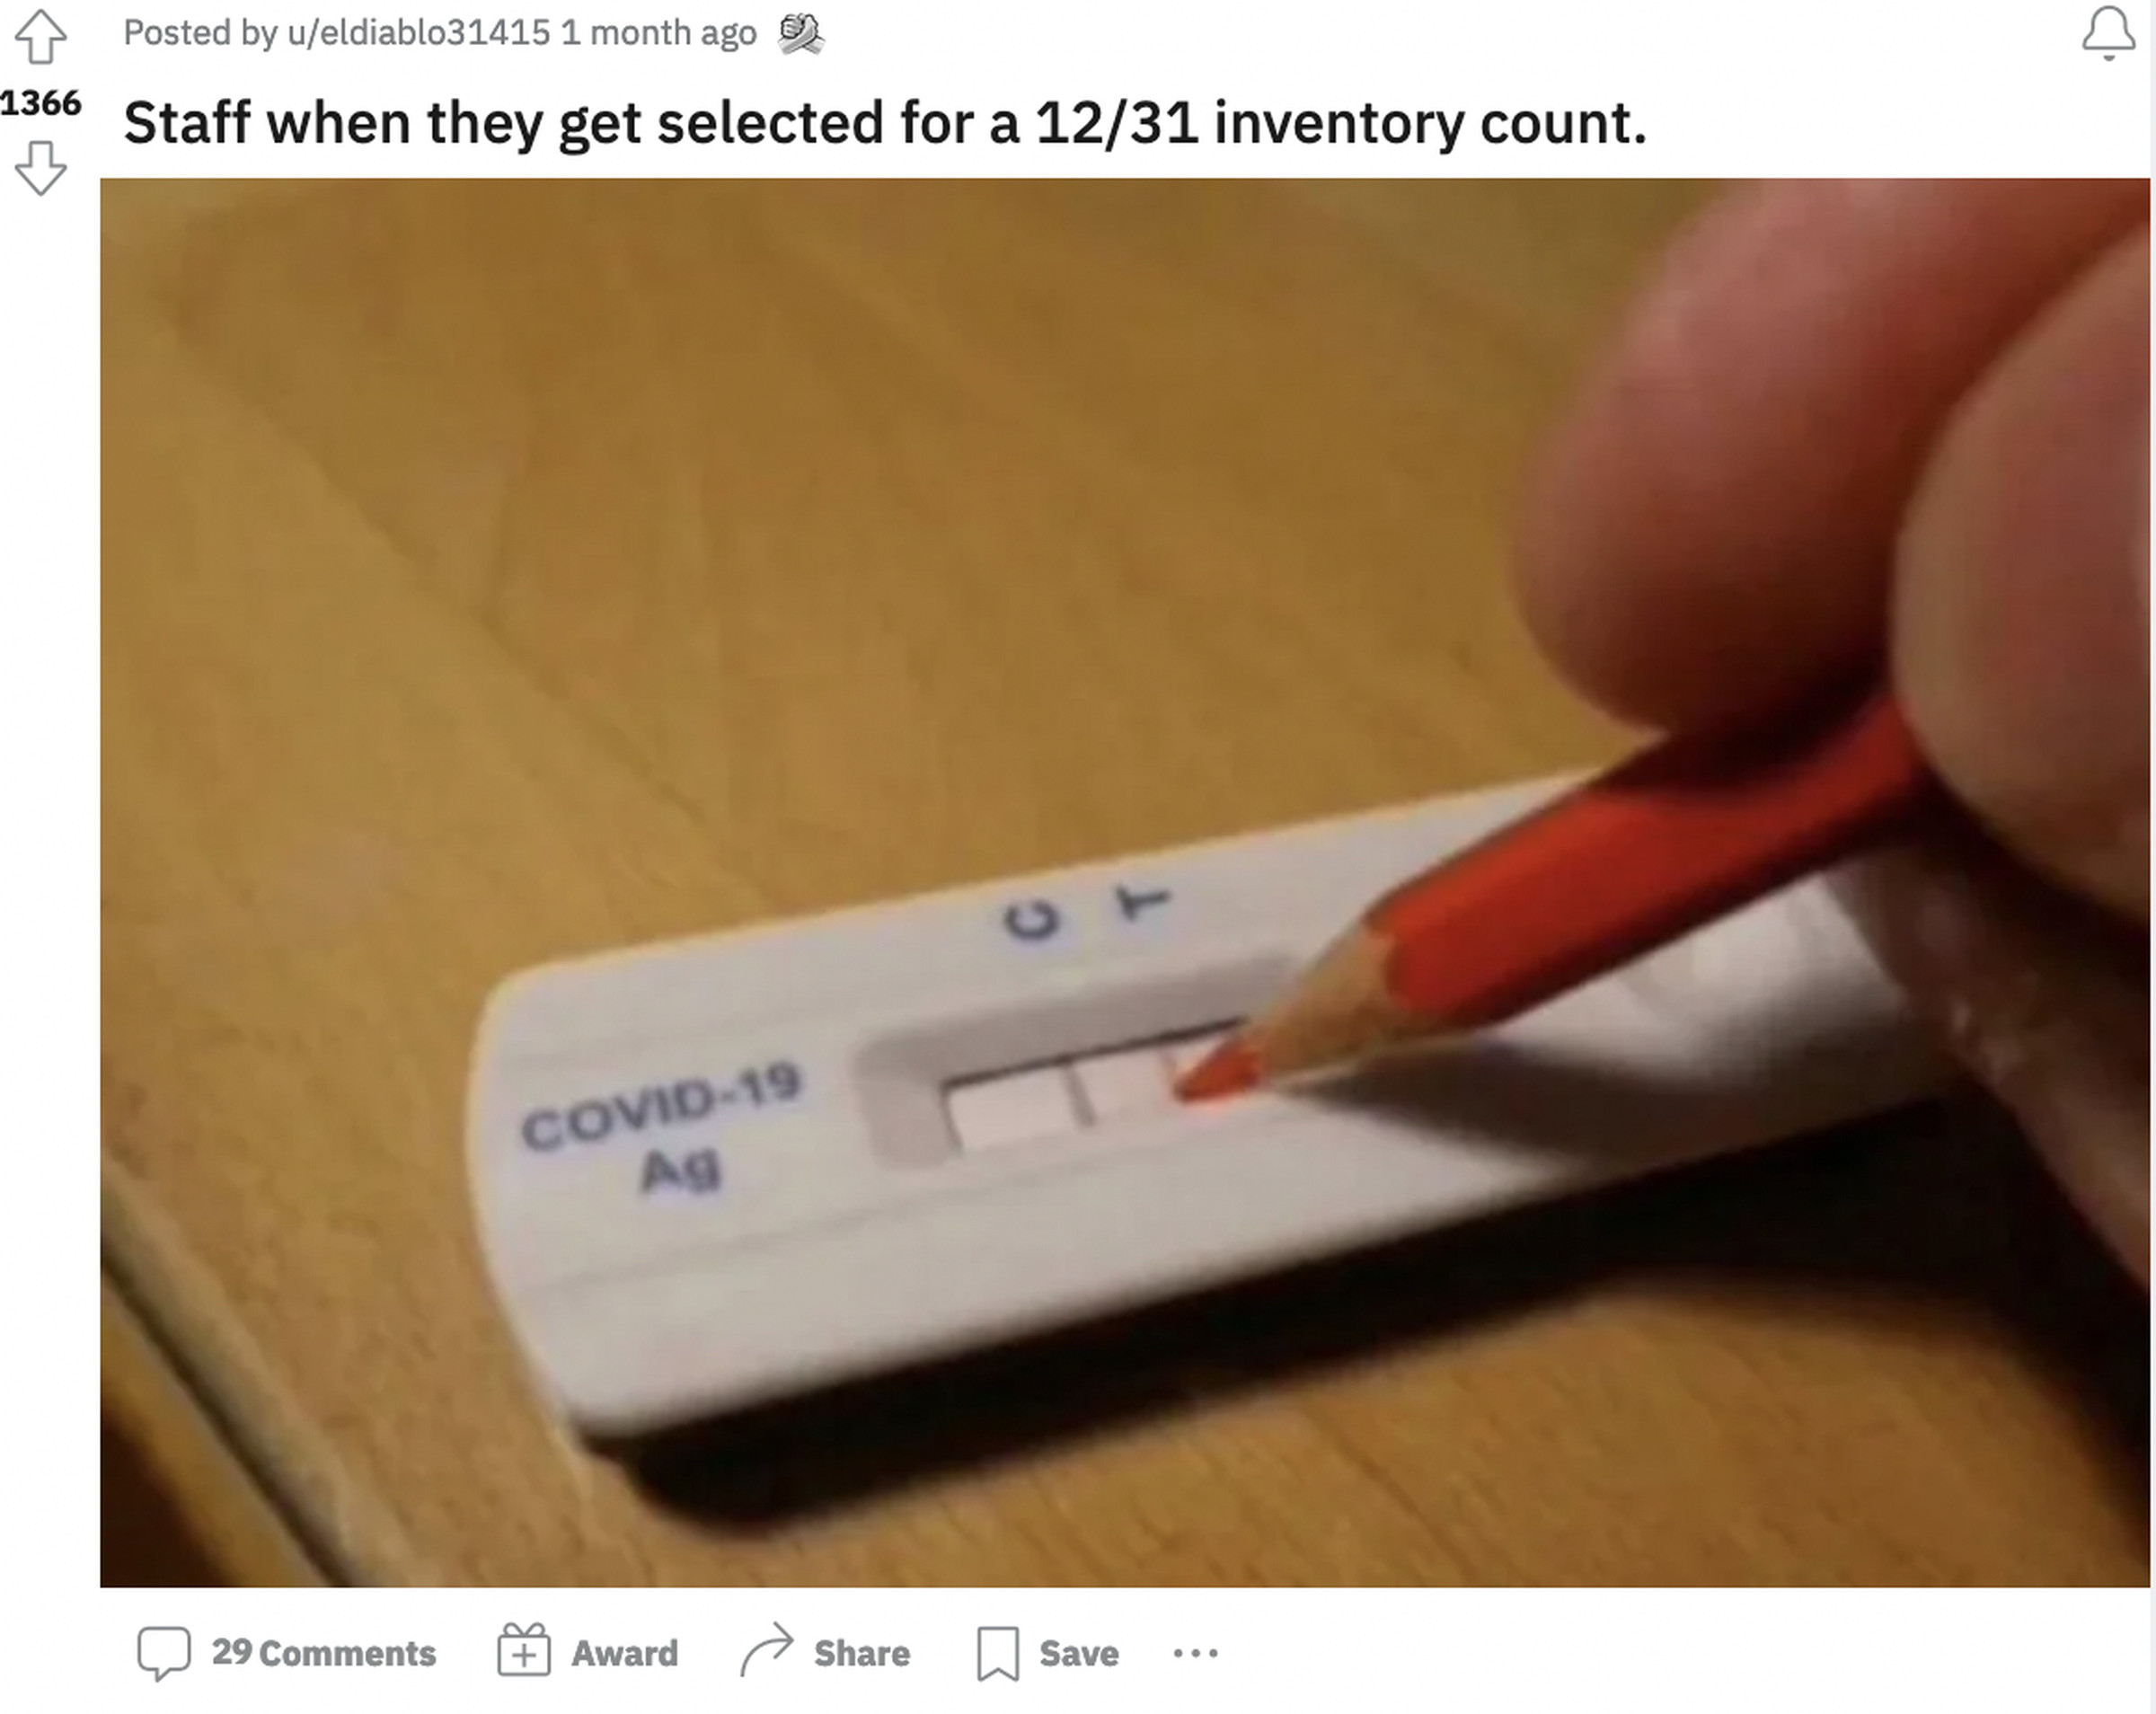 An image of a person altering a COVID-19 test to show a positive result, captioned “Staff when they get selected for a 12/31 inventory count.”